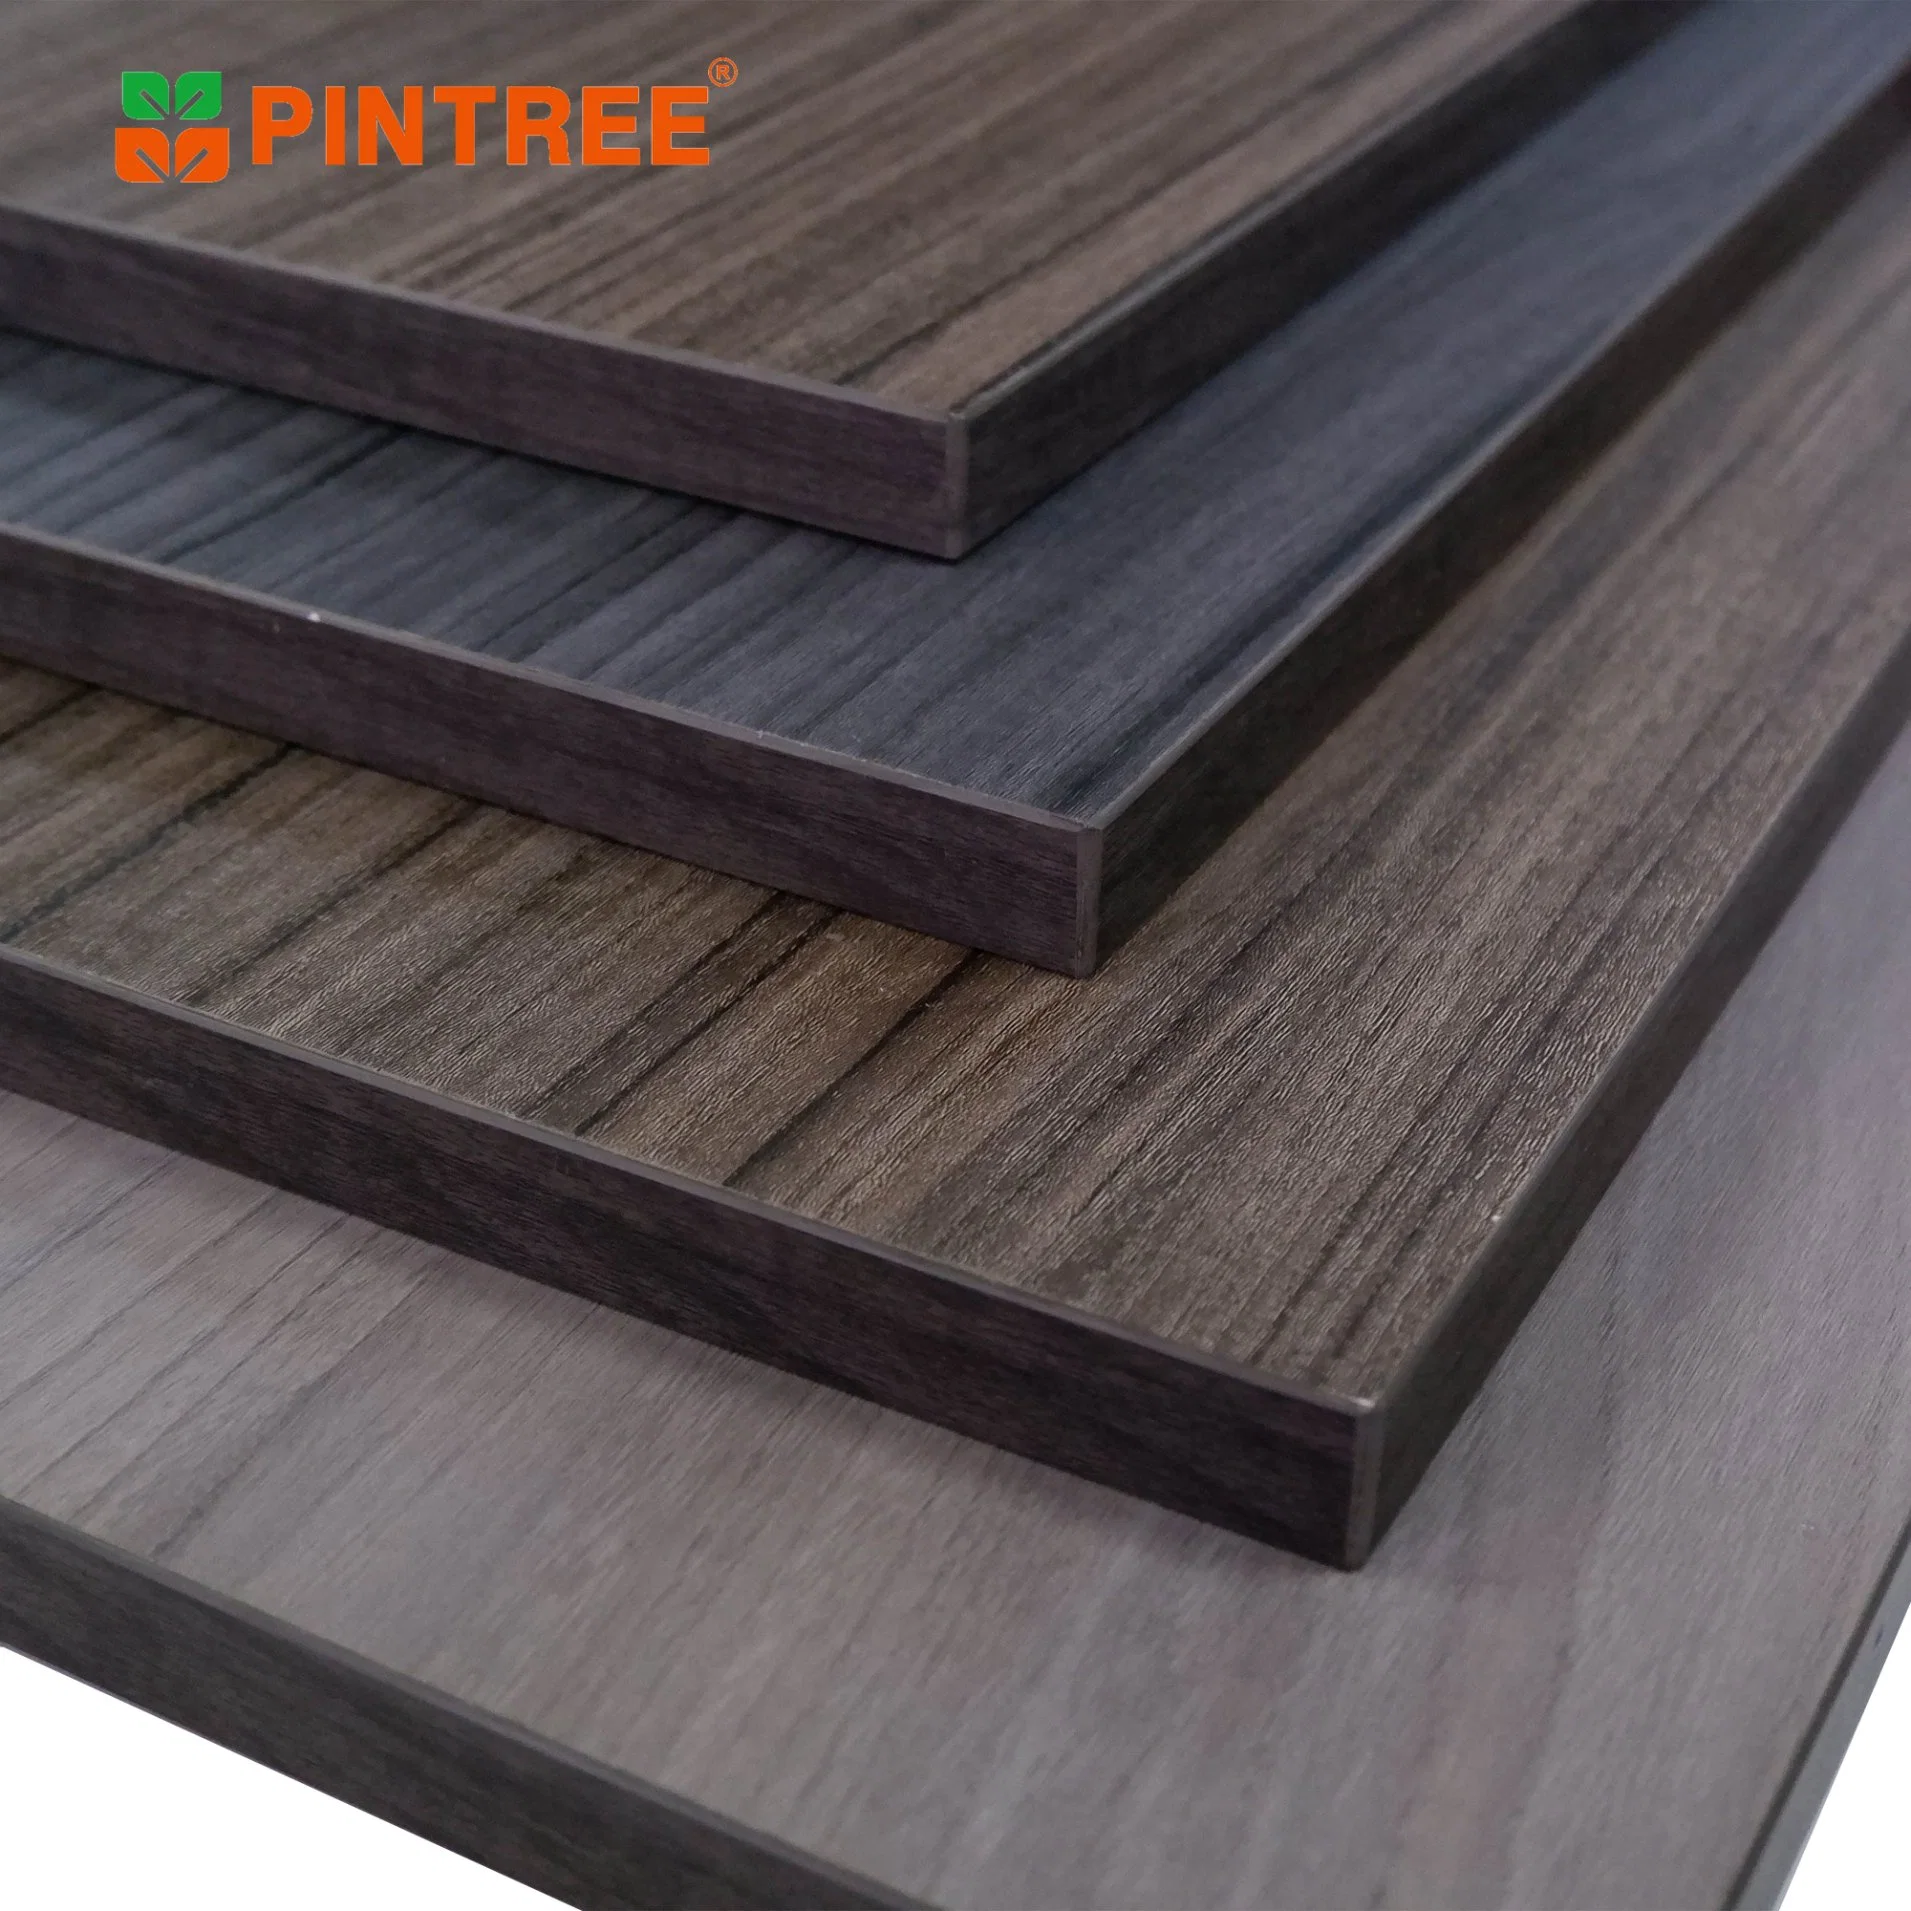 E1 Grade Laminate MDF Melamine Board and Melamine Plywood 18mm for Furniture and Decoration